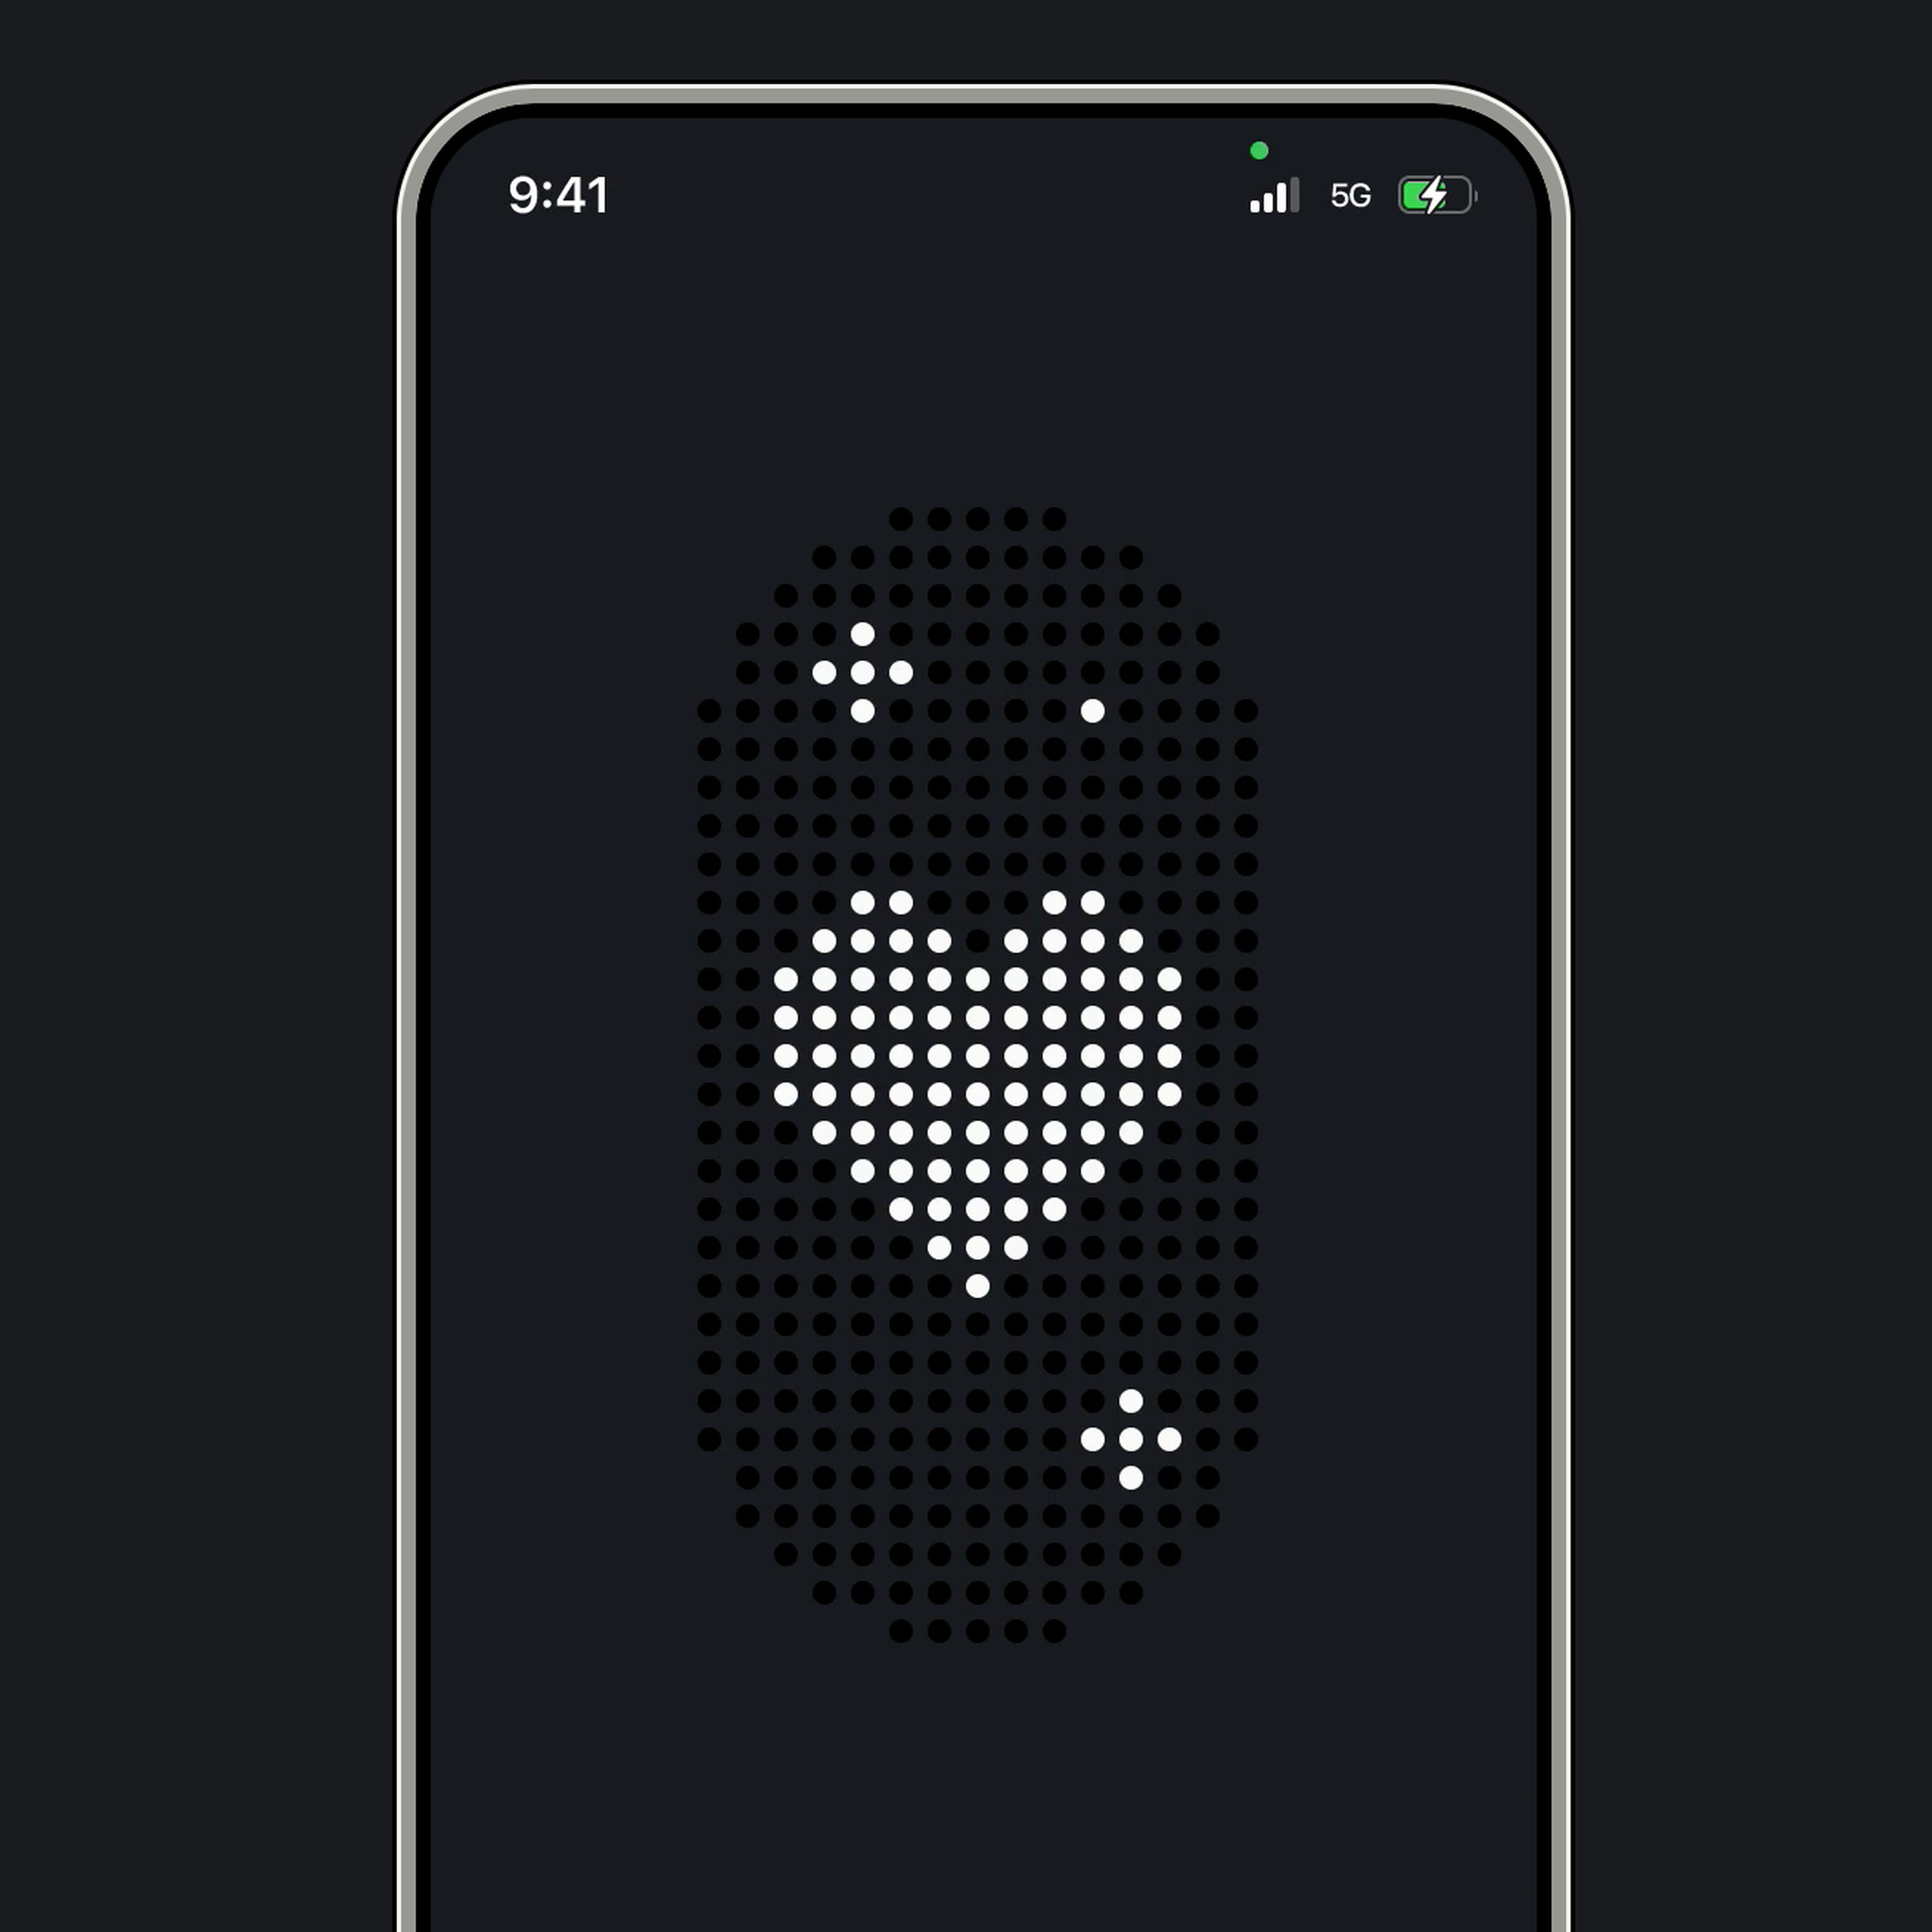 An illustration showing an app with a black background showing hearts on a black display that mimics the matrix display used on VanMoof e-bikes.